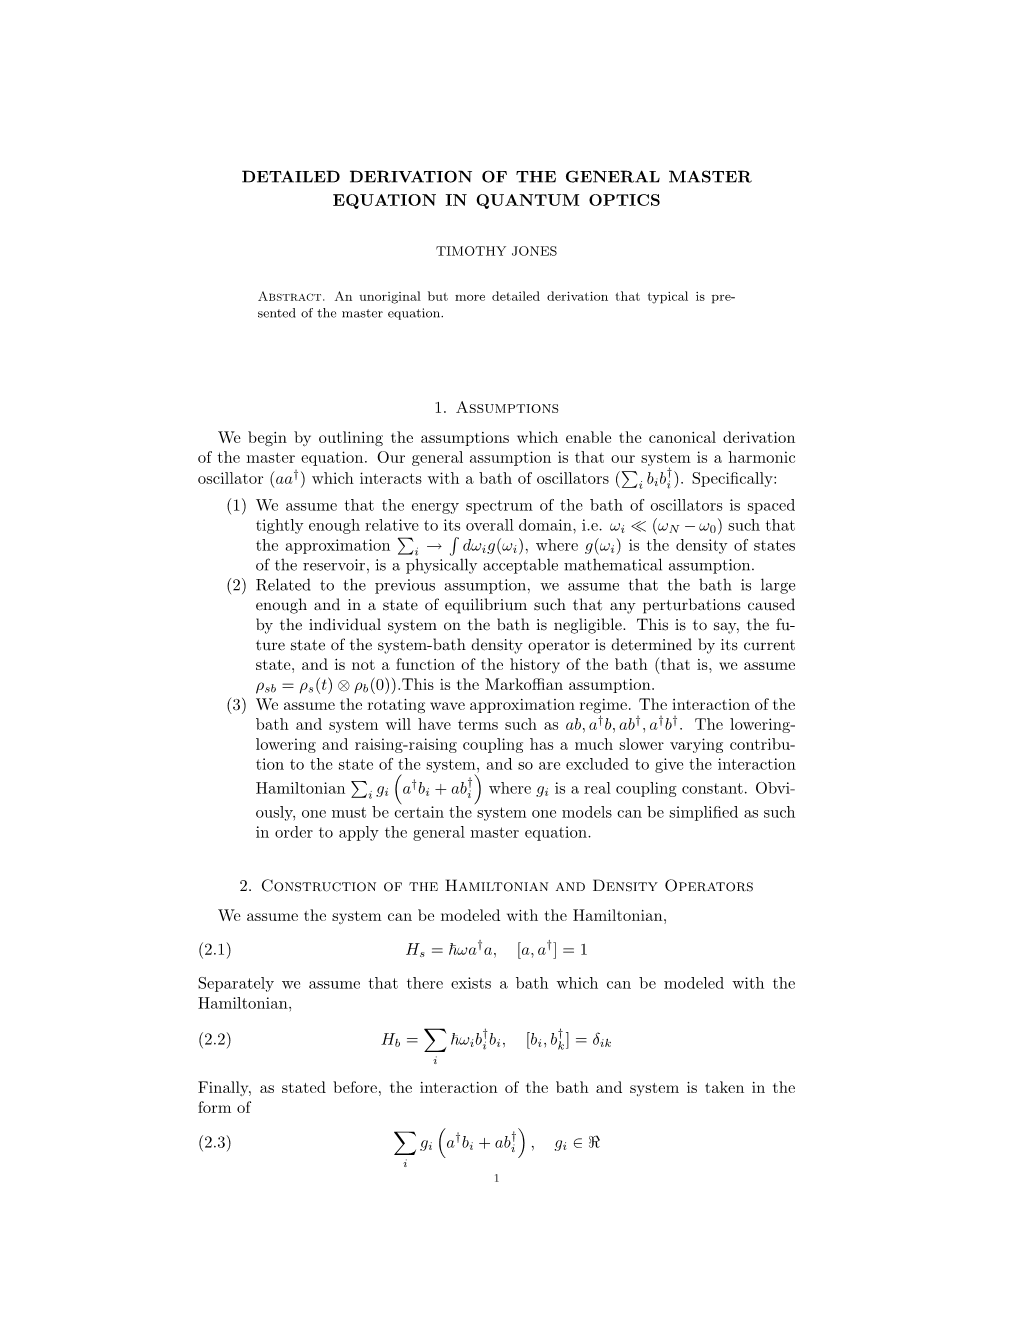 Detailed Derivation of the General Master Equation in Quantum Optics